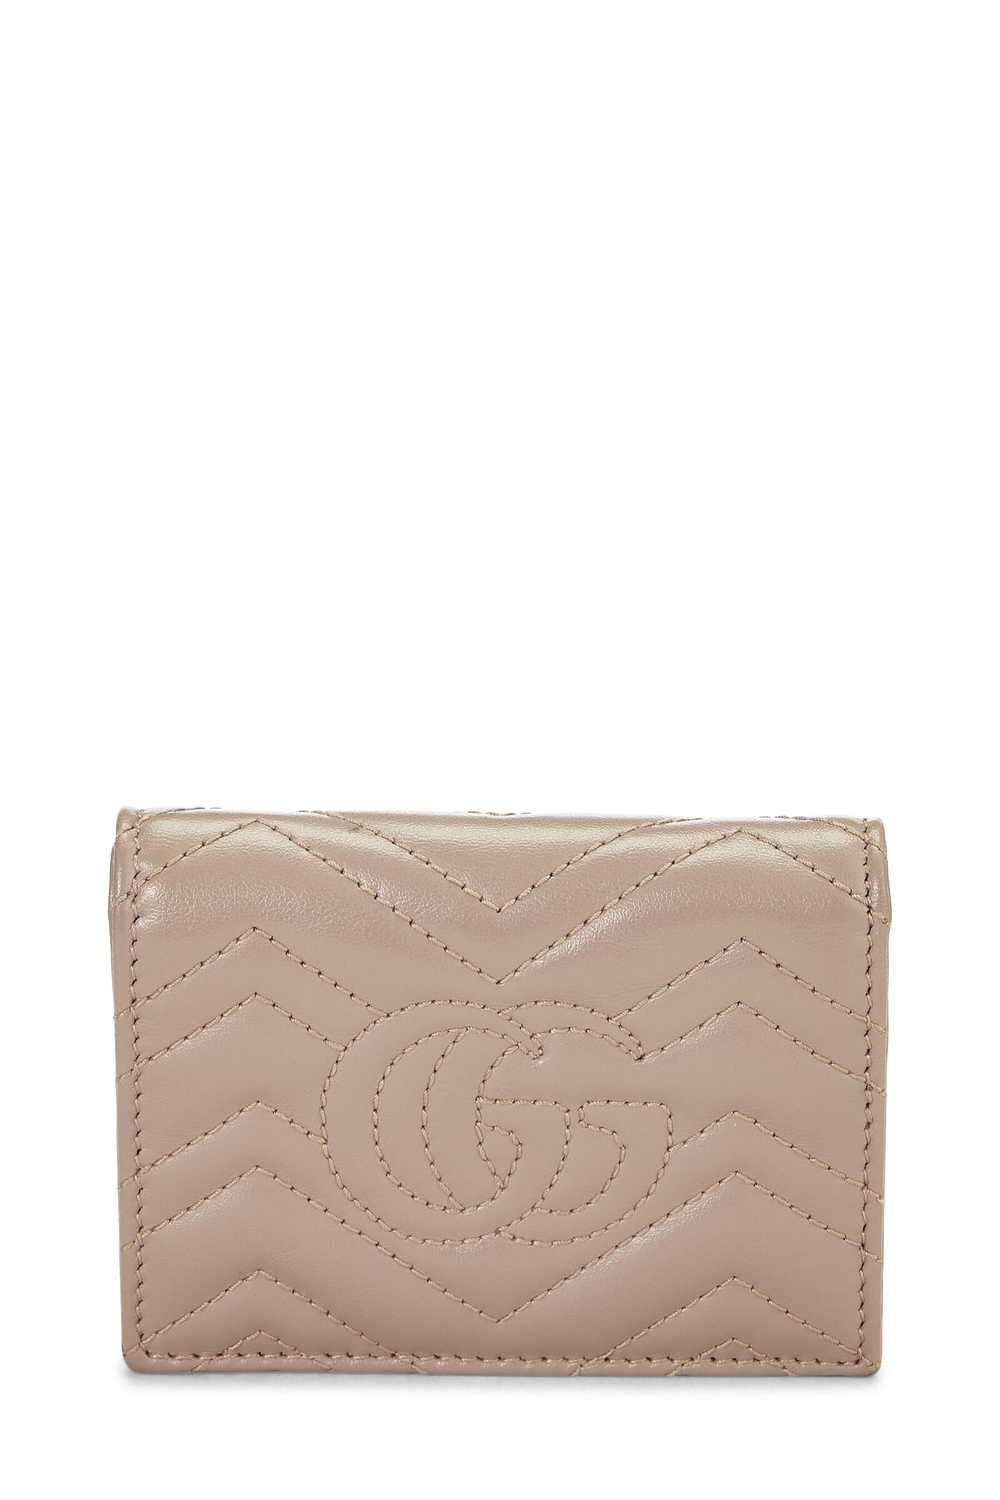 Pink Leather GG Marmont Compact Wallet - image 3